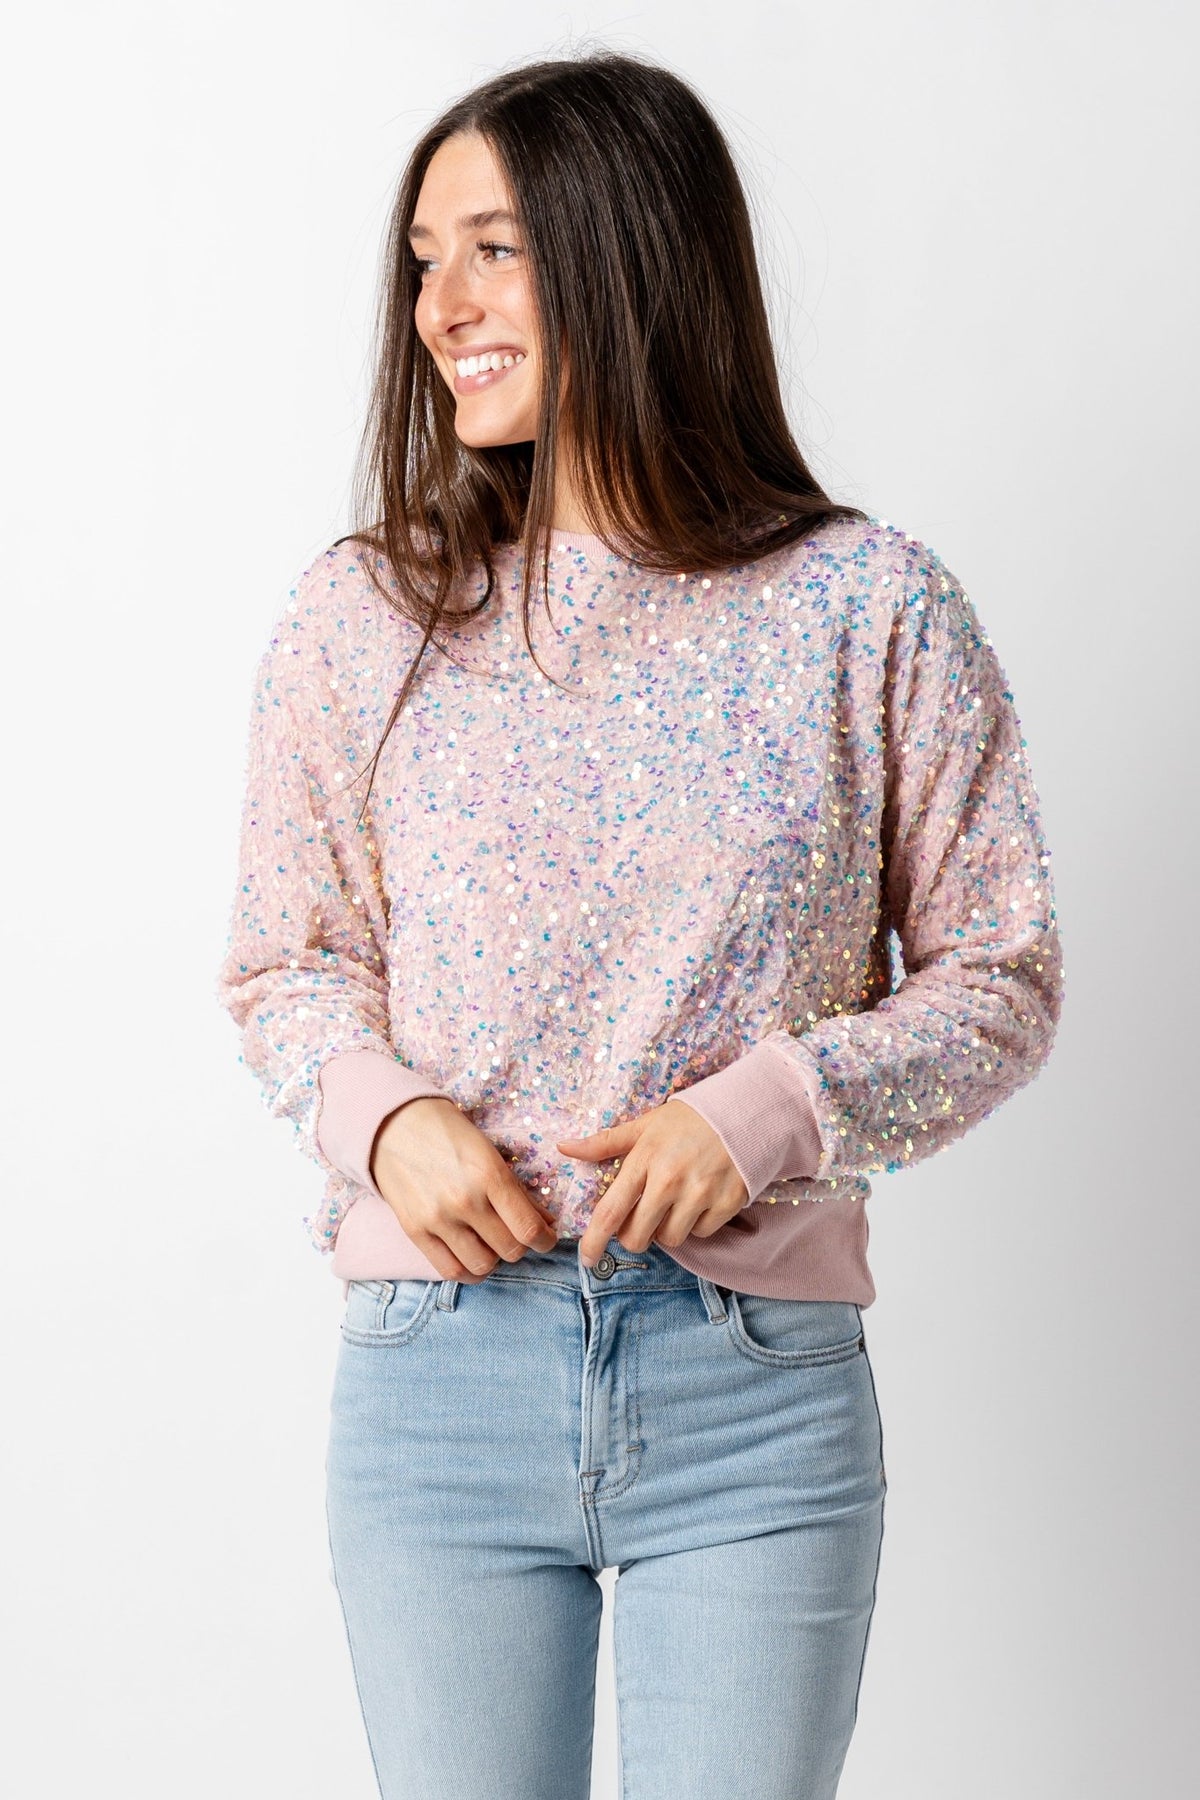 Fiesta sequin sweatshirt pink - Trendy Holiday Apparel at Lush Fashion Lounge Boutique in Oklahoma City